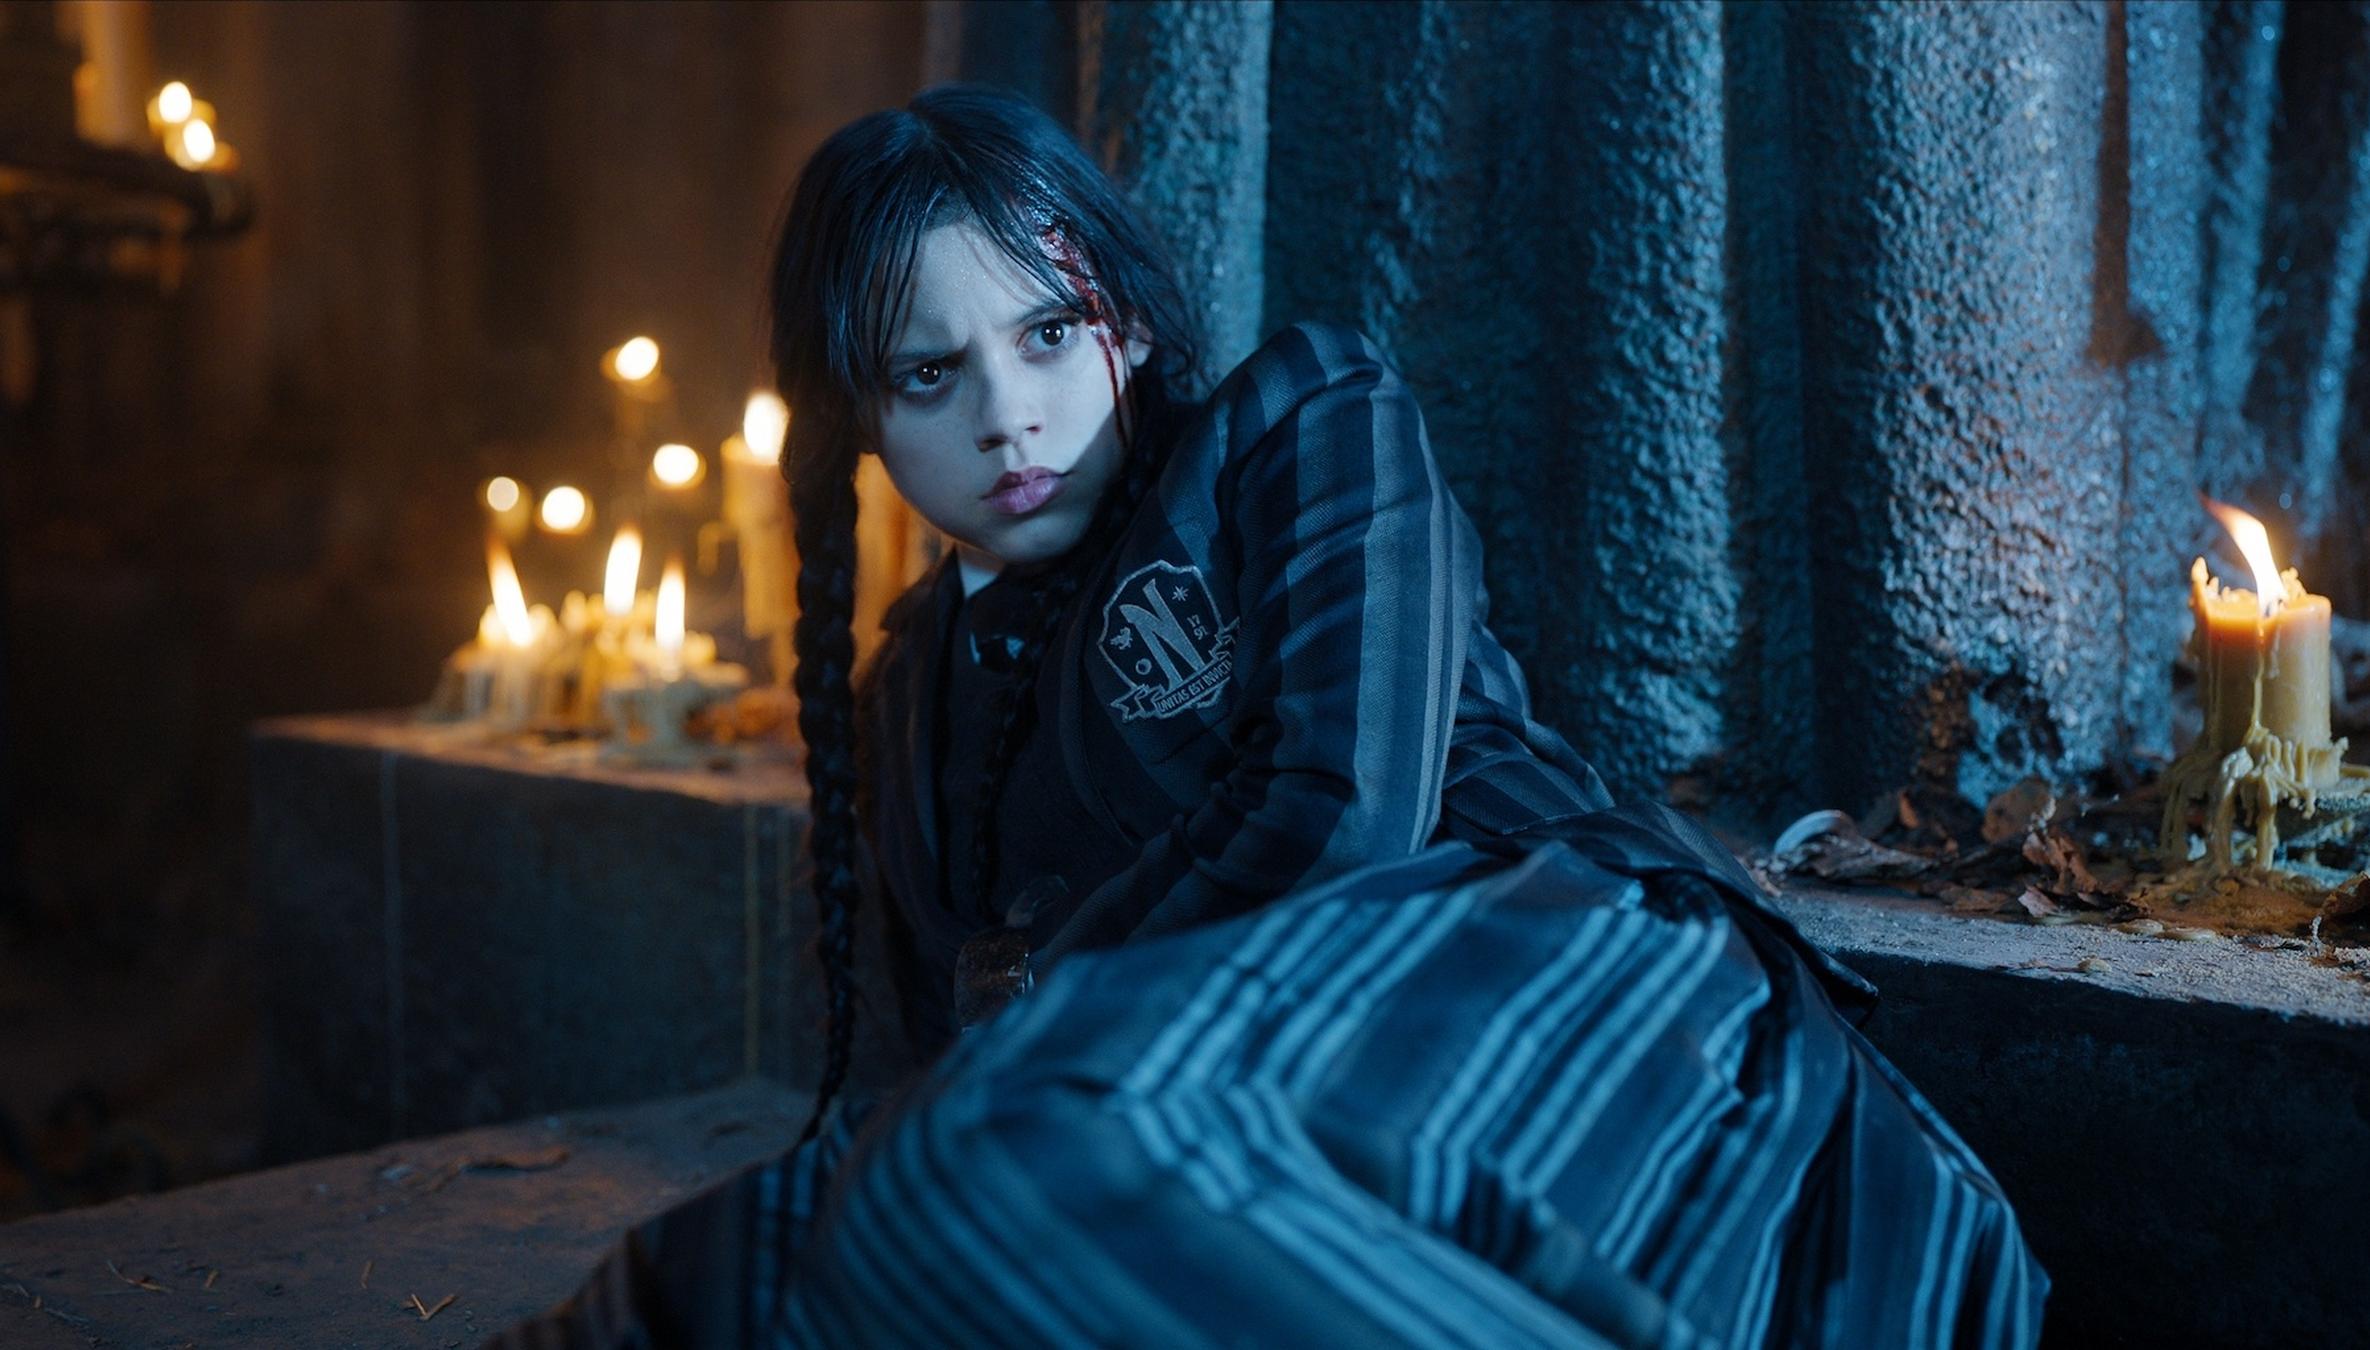 Netflix's Wednesday Addams Series - Everything You Need To Know